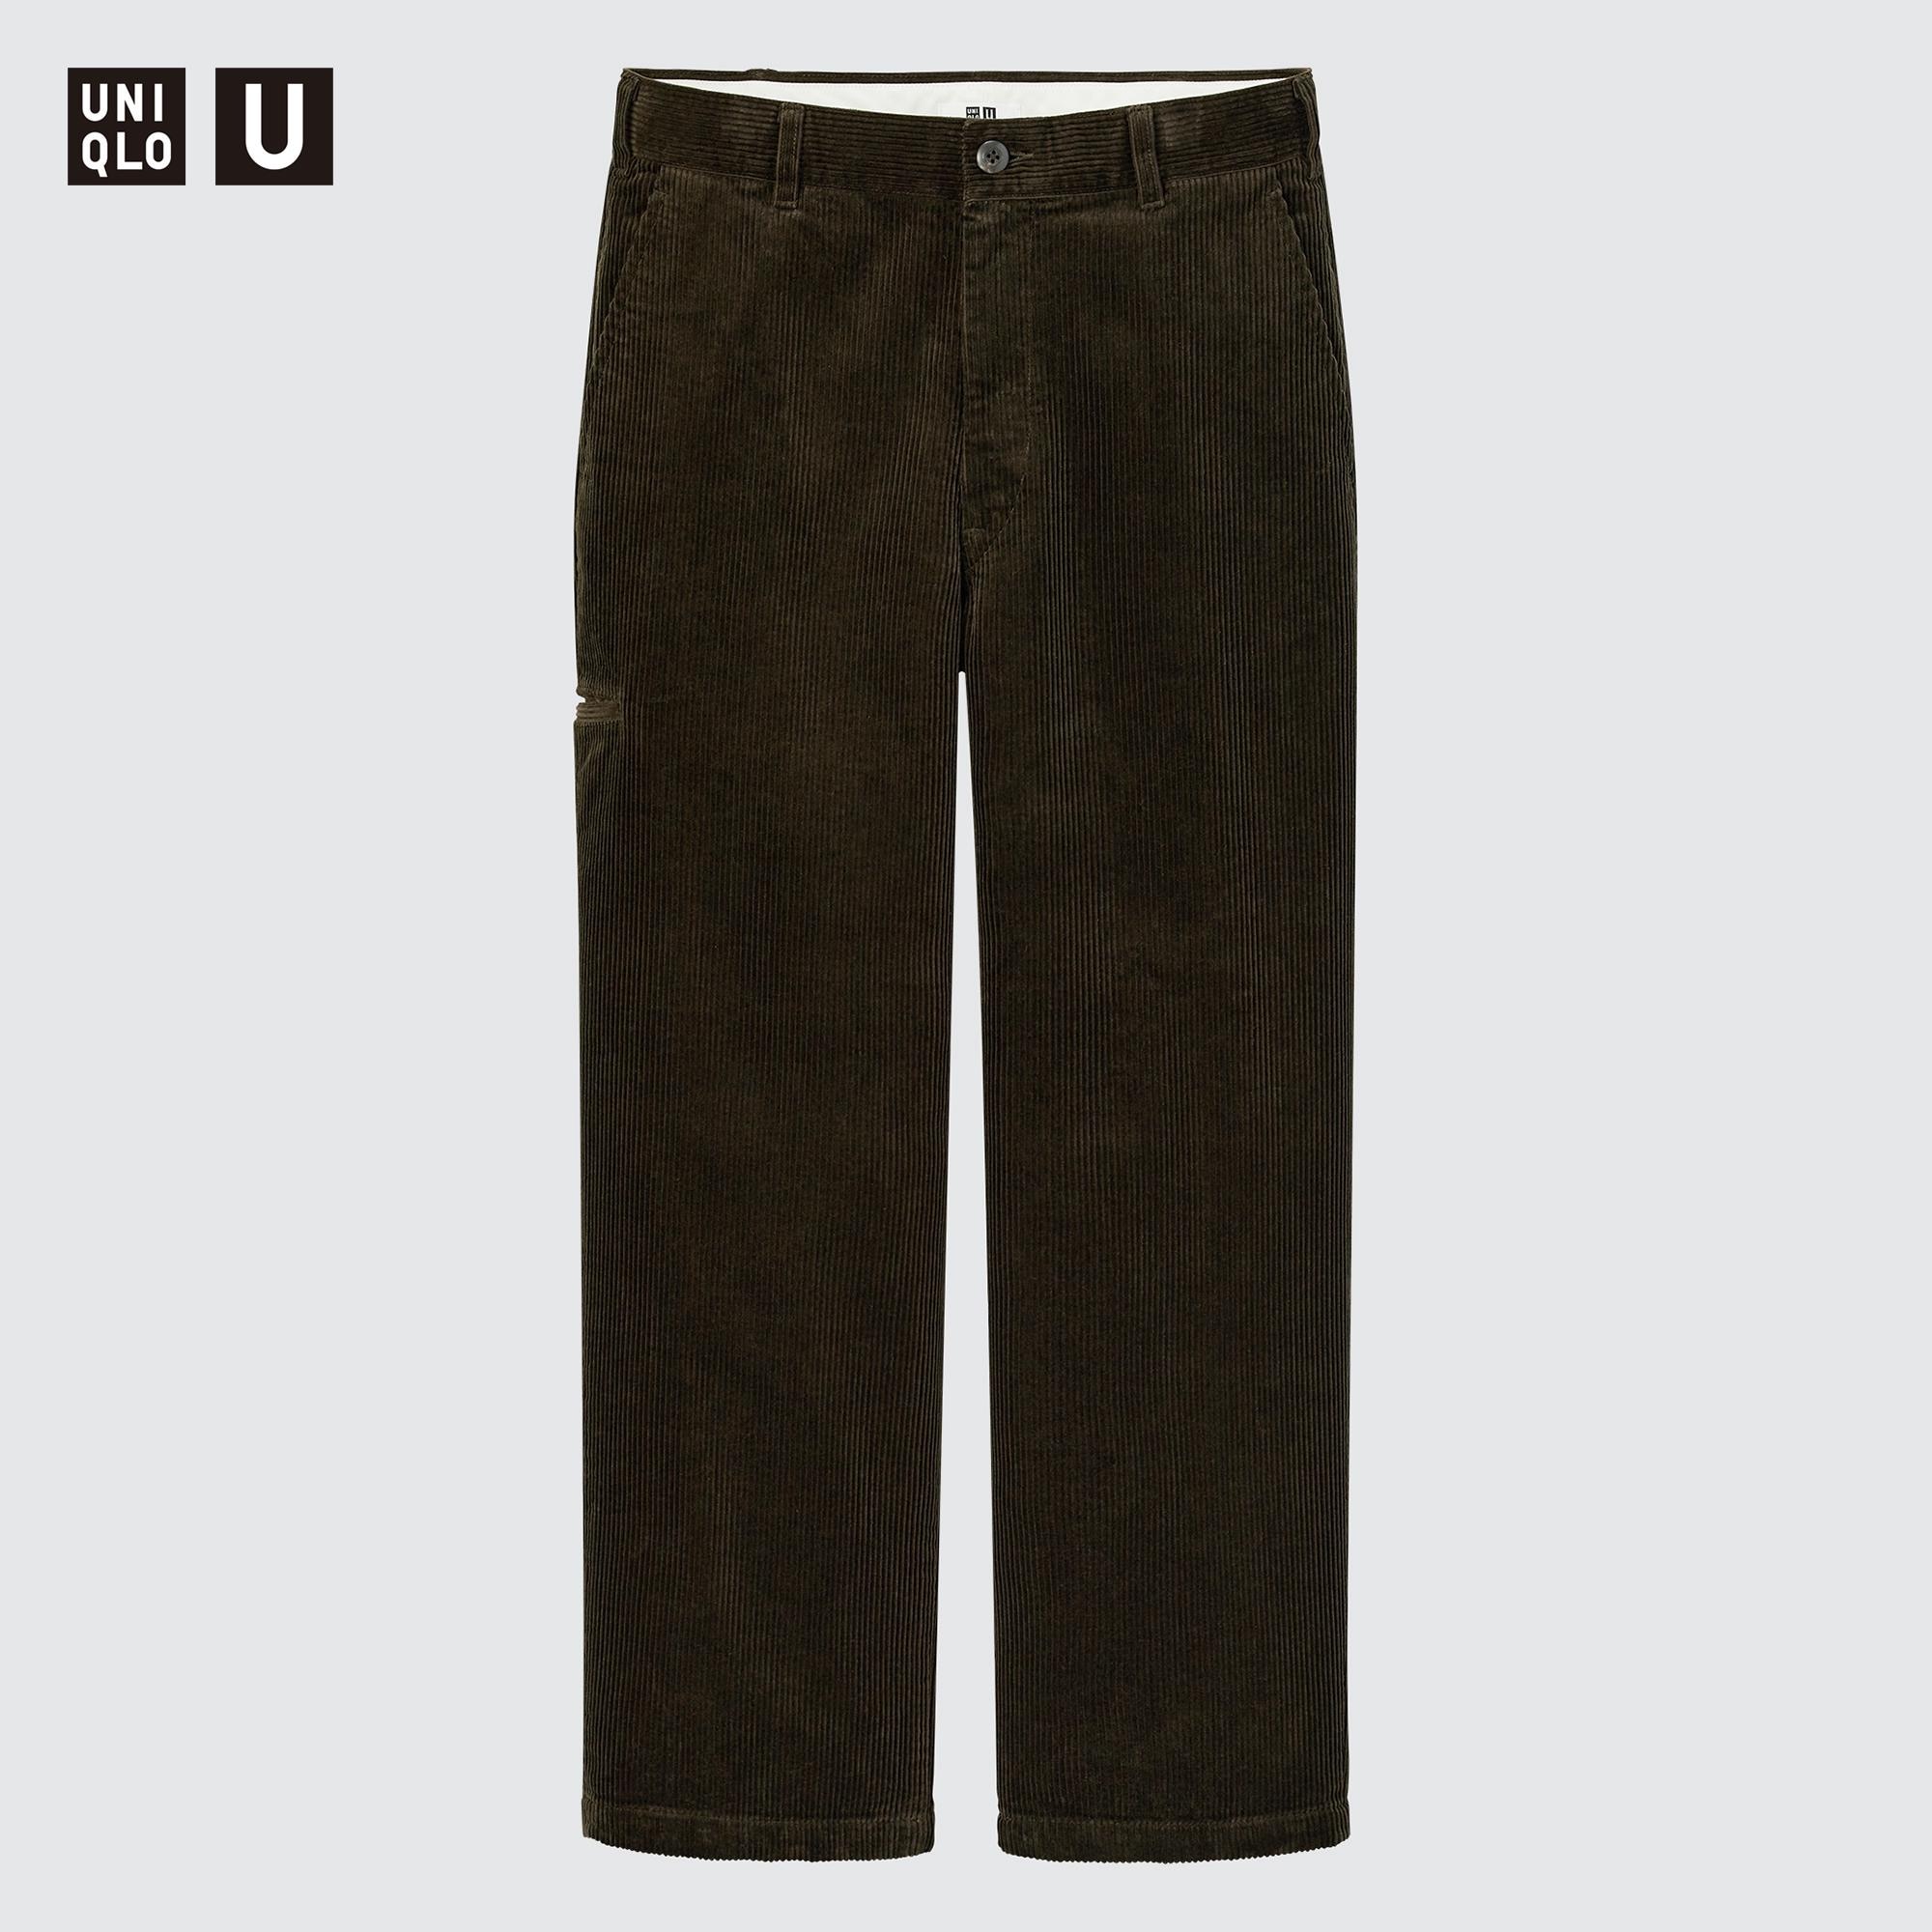 MENS COTTON RELAXED ANKLE PANTS  UNIQLO PH